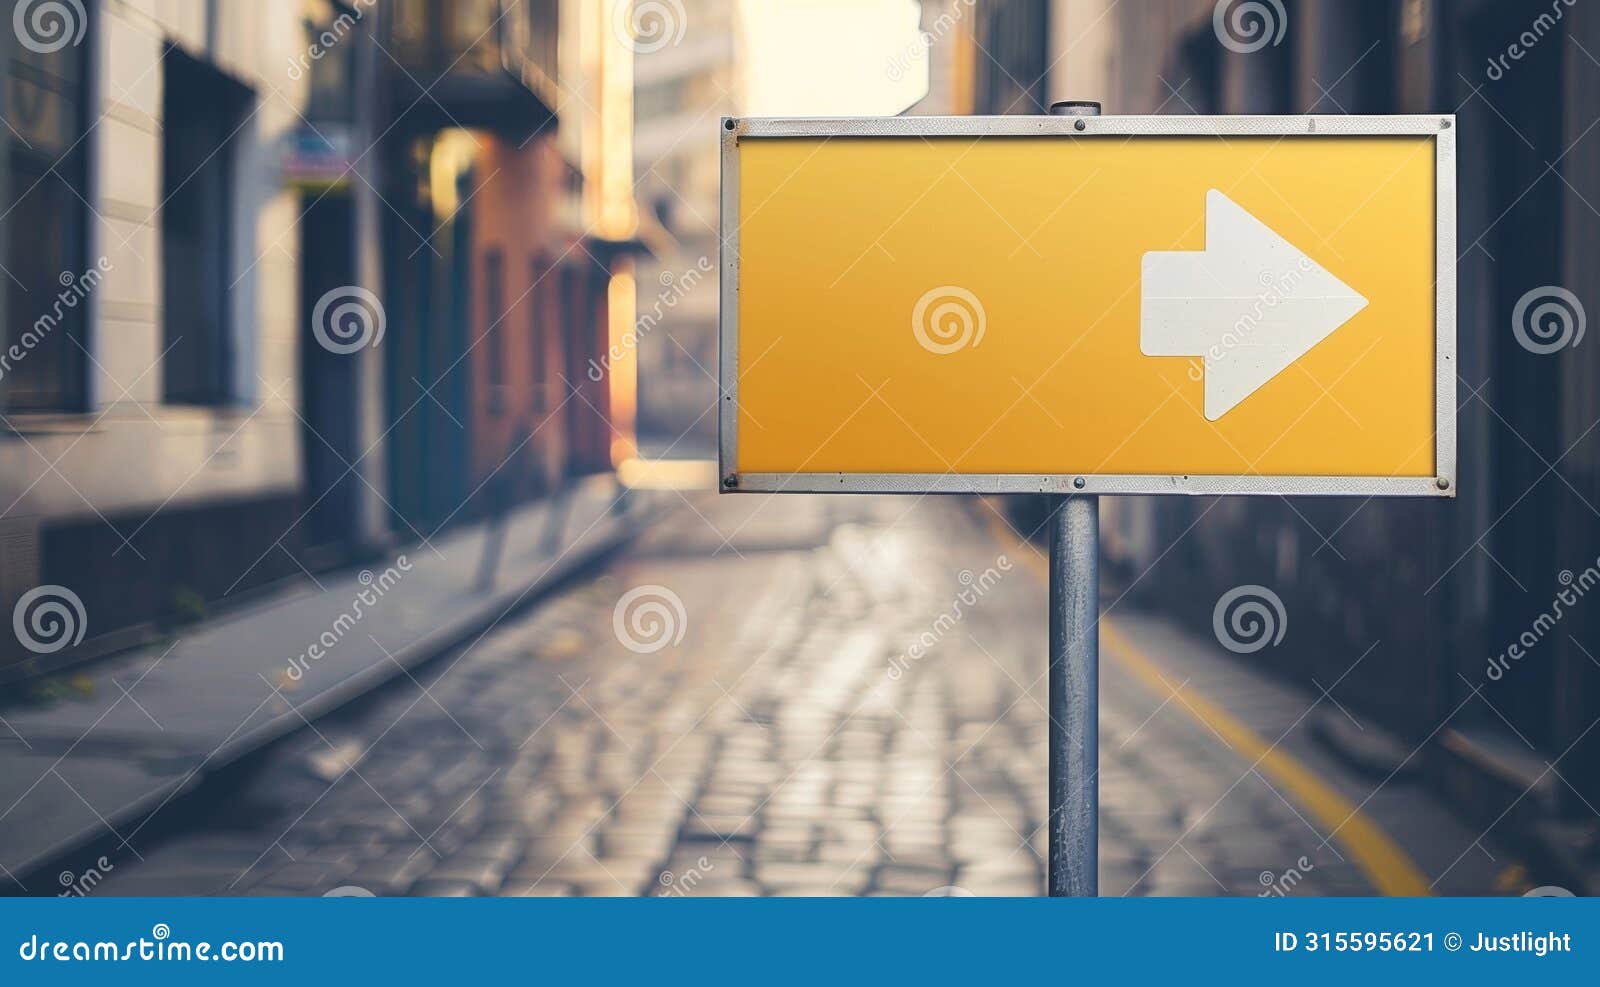 blank mockup of directional signs with bright eyecatching graphics to grab attention